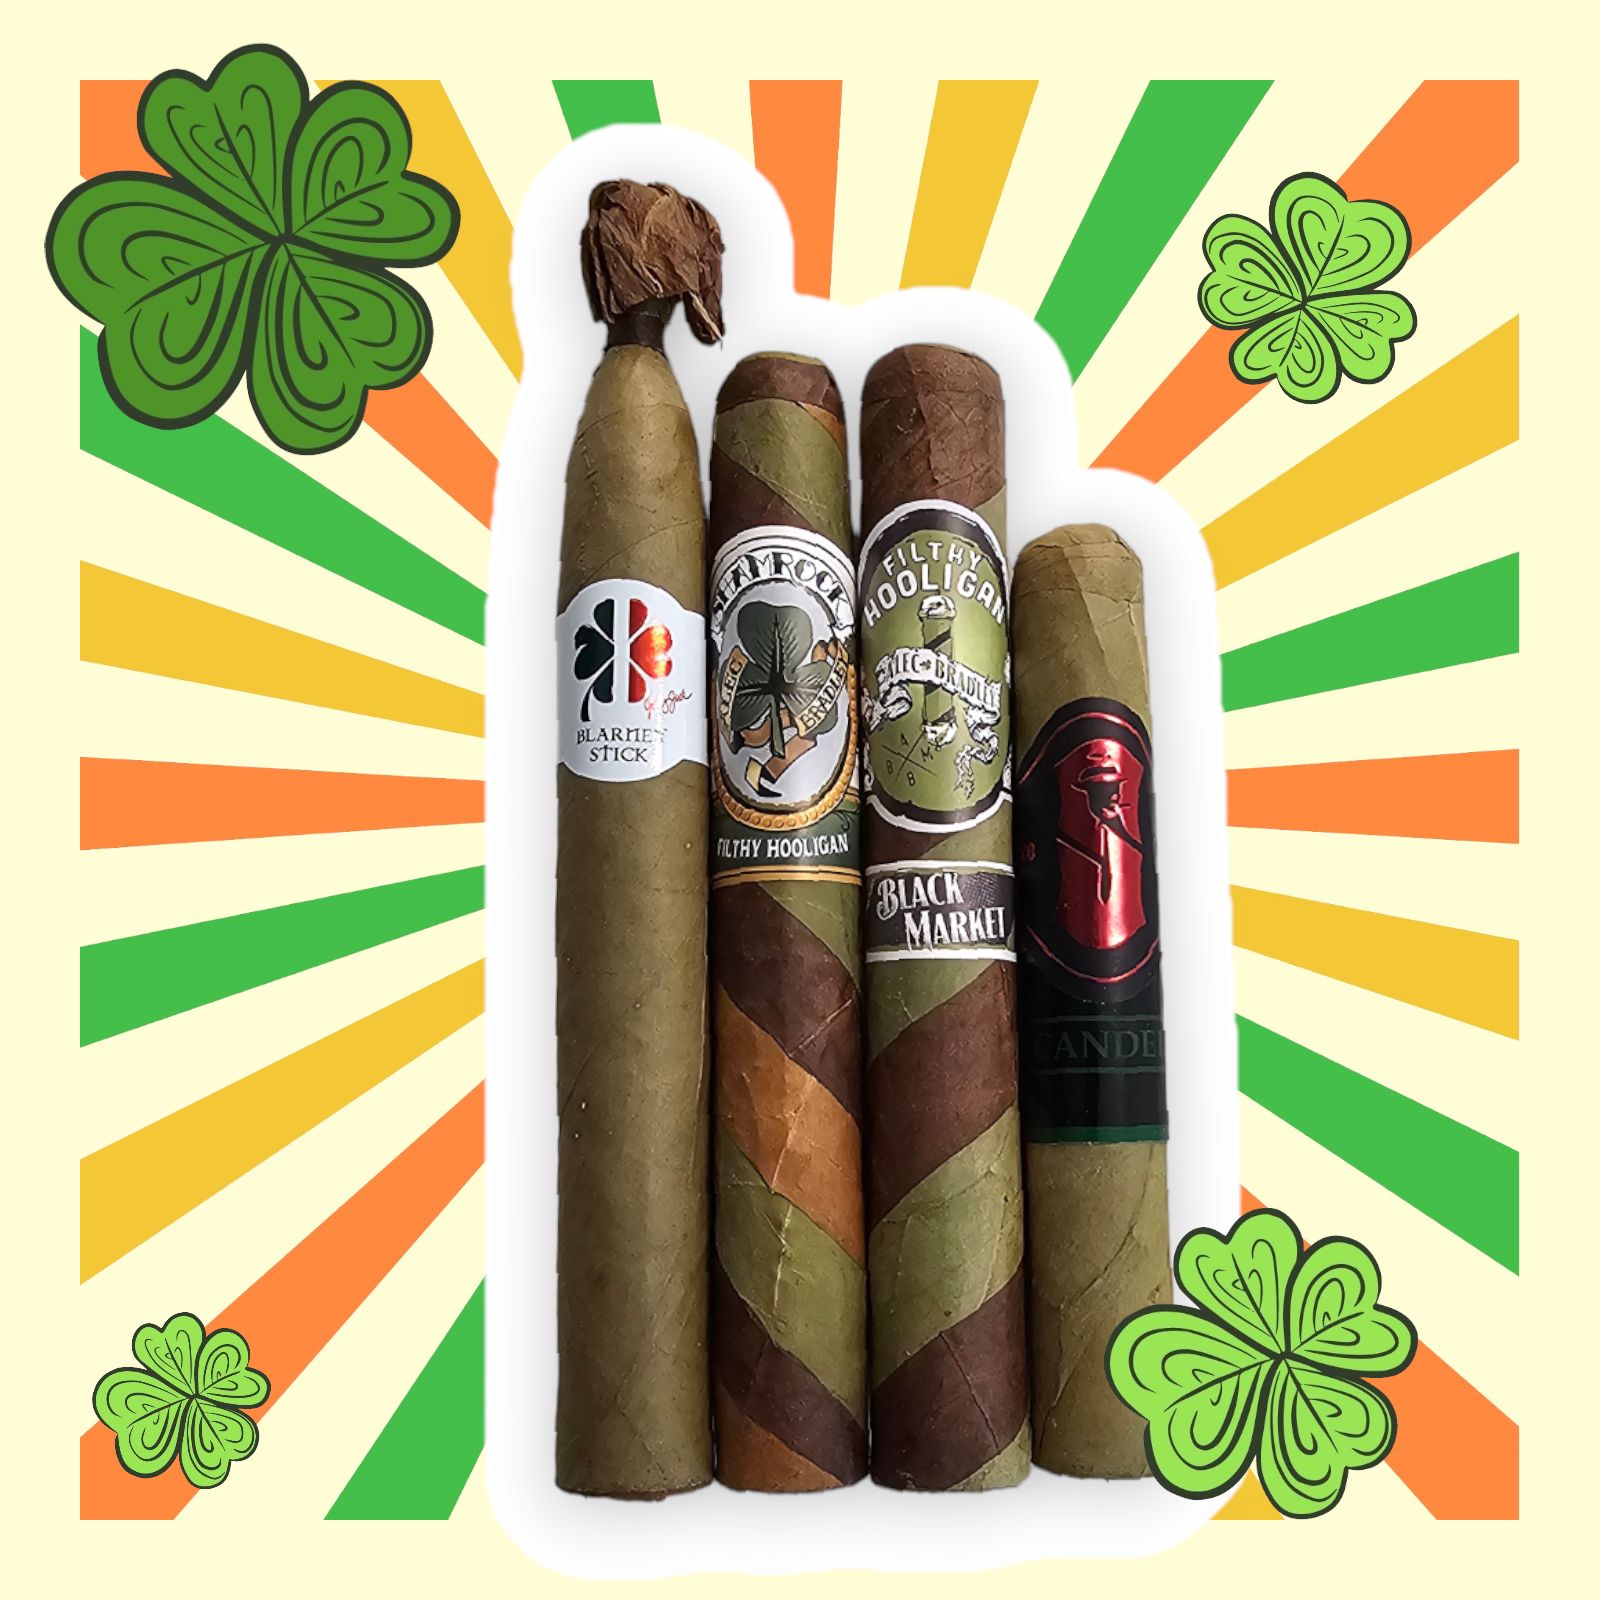 St Paddy's Day Blarney Blowout Sampler